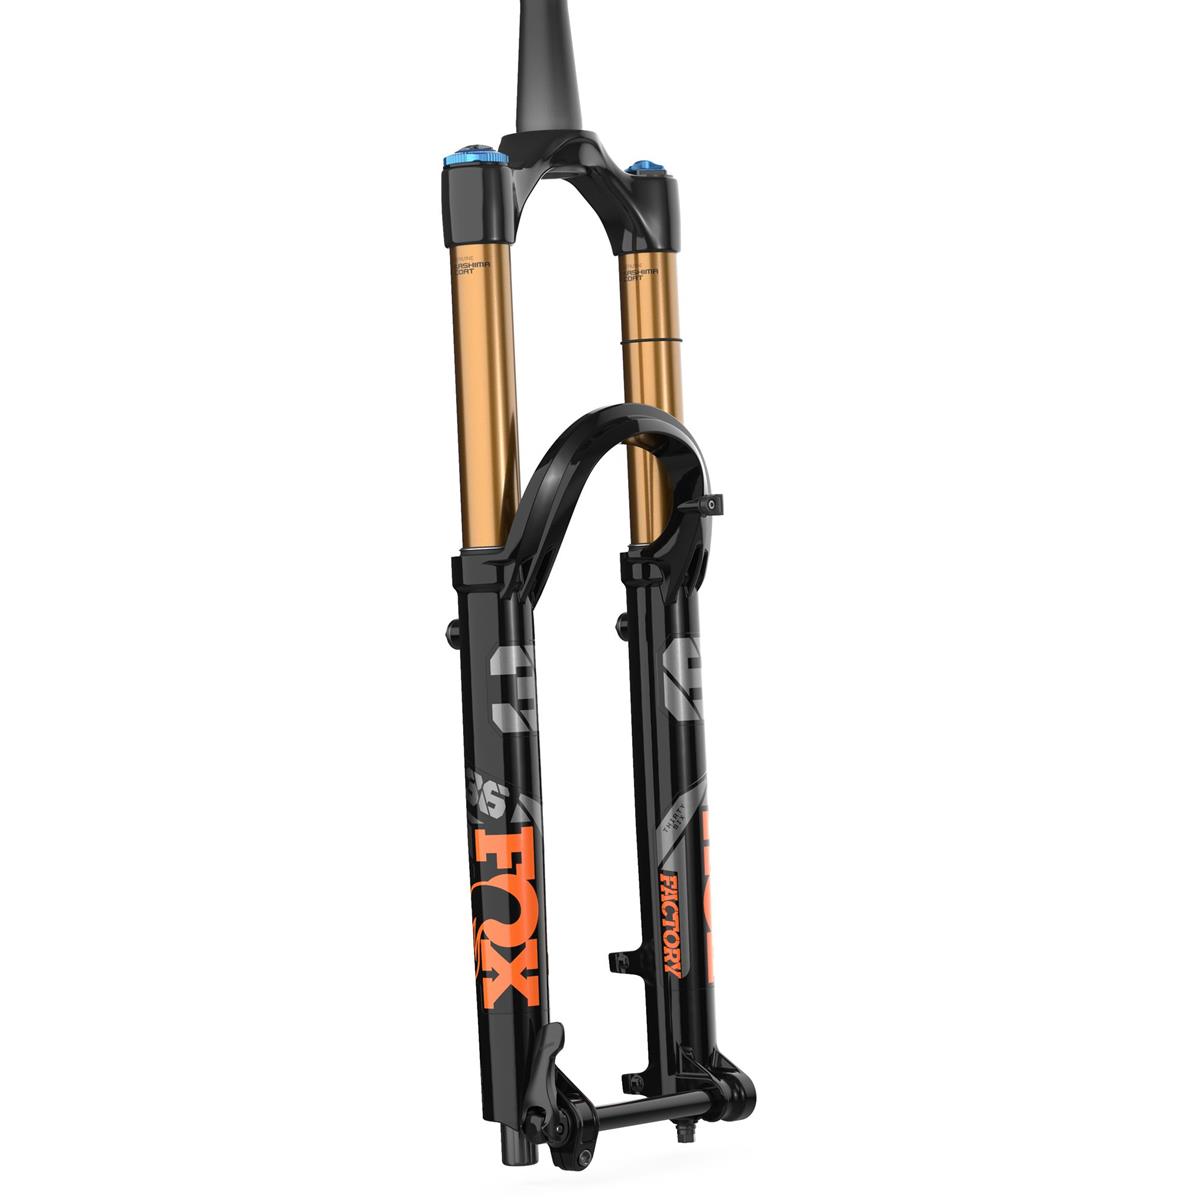 Fox Racing Shox Suspension Fork 36 Float Factory Kashima 29 Inches, 15x110 mm, GRIP 2, 51 mm Offset, 160 mm